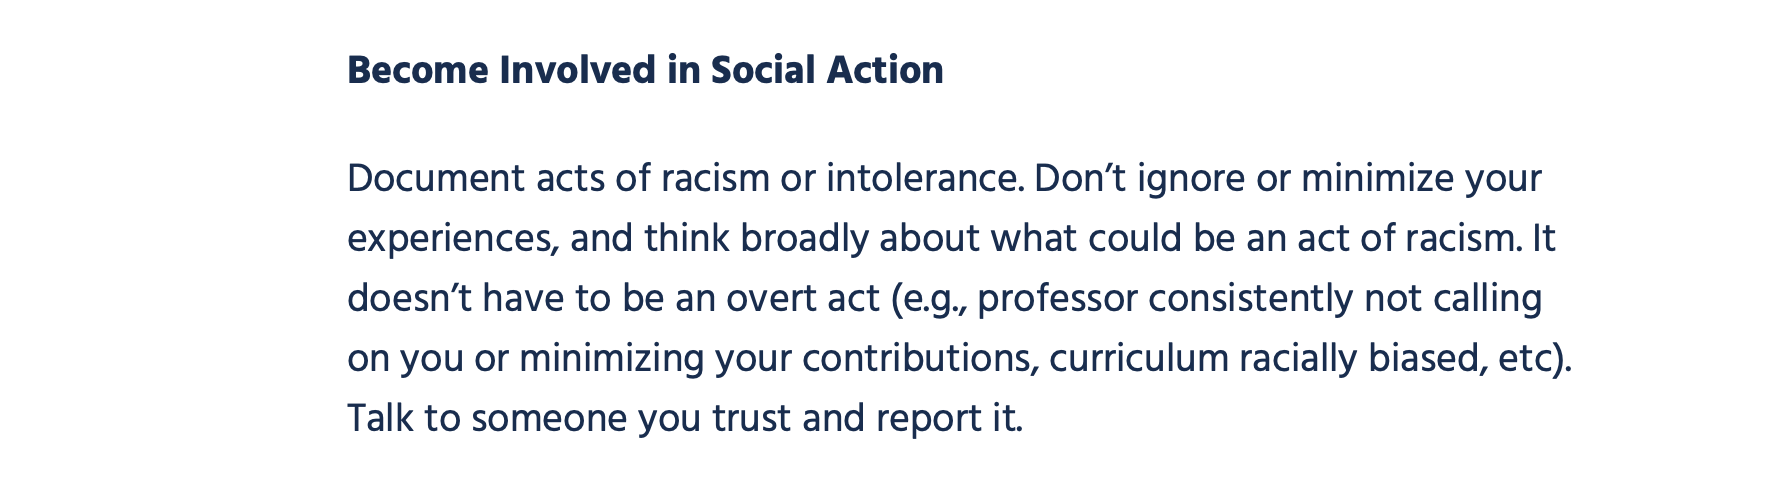 A section from the "Coping with Racism & Discrimination" list.